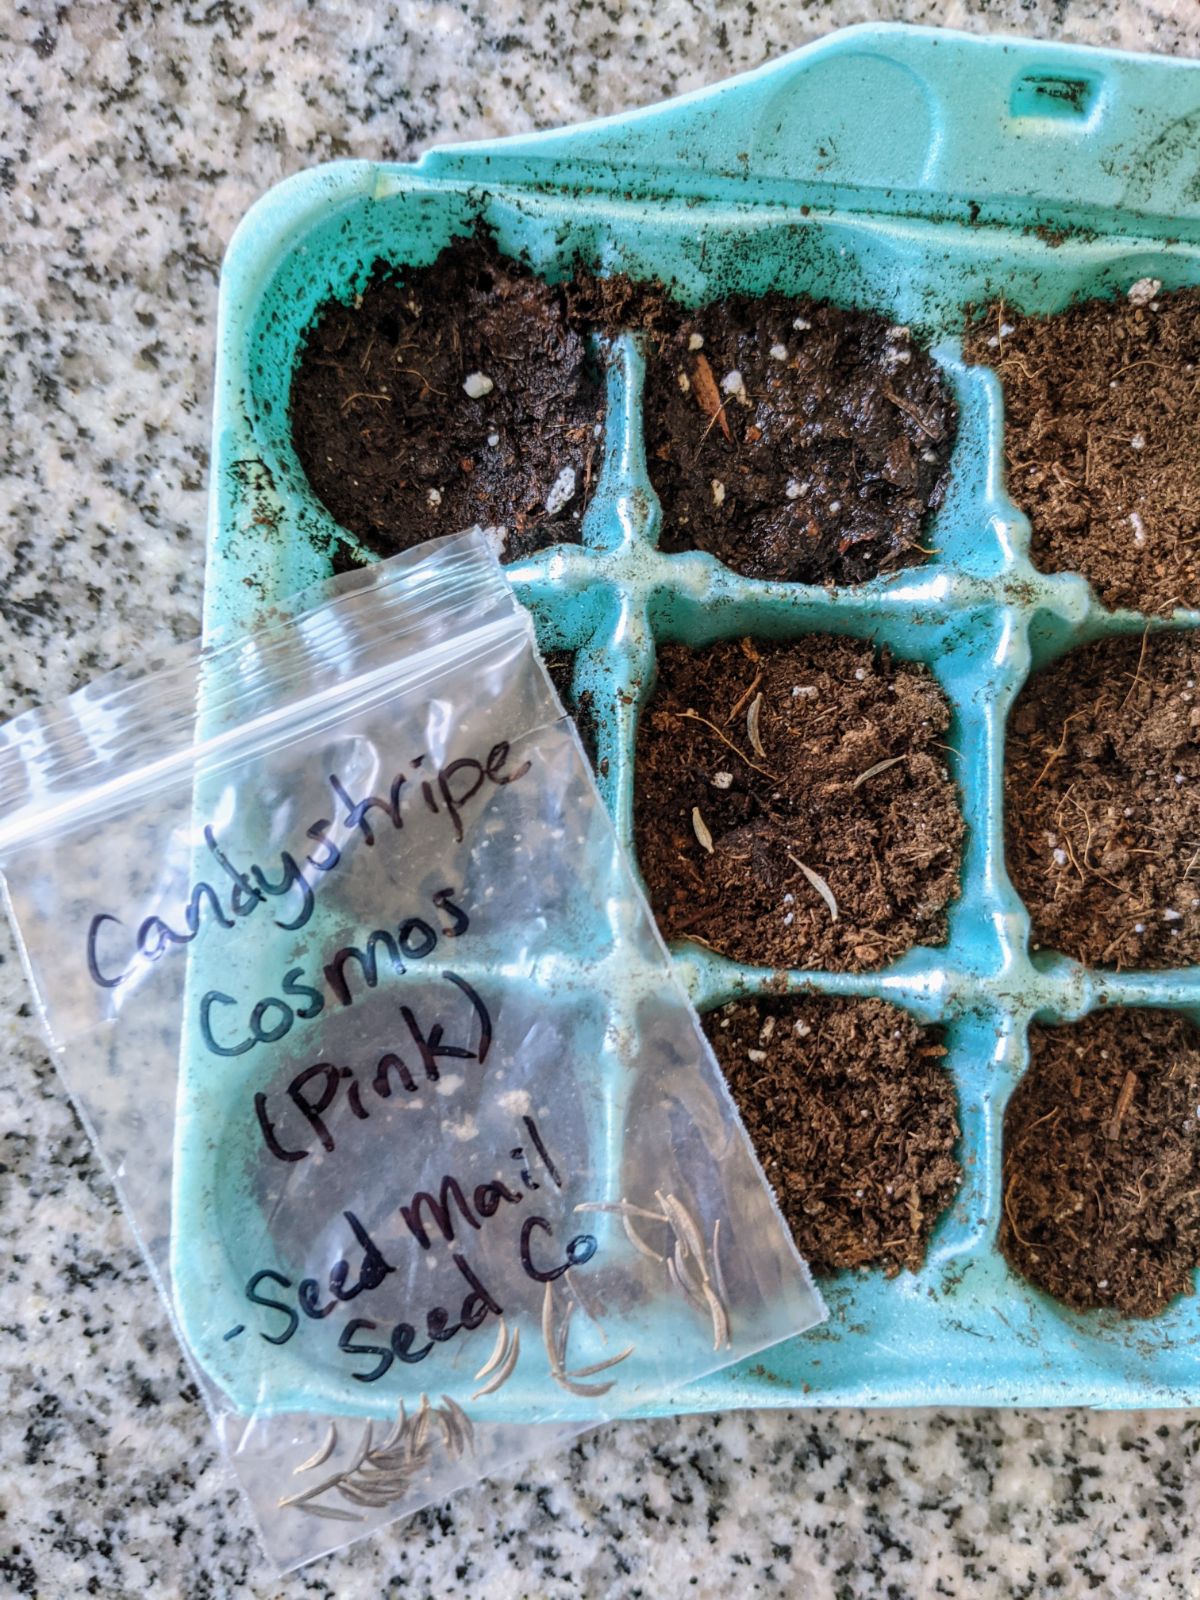 Planting Cosmos seeds in egg carton with soil